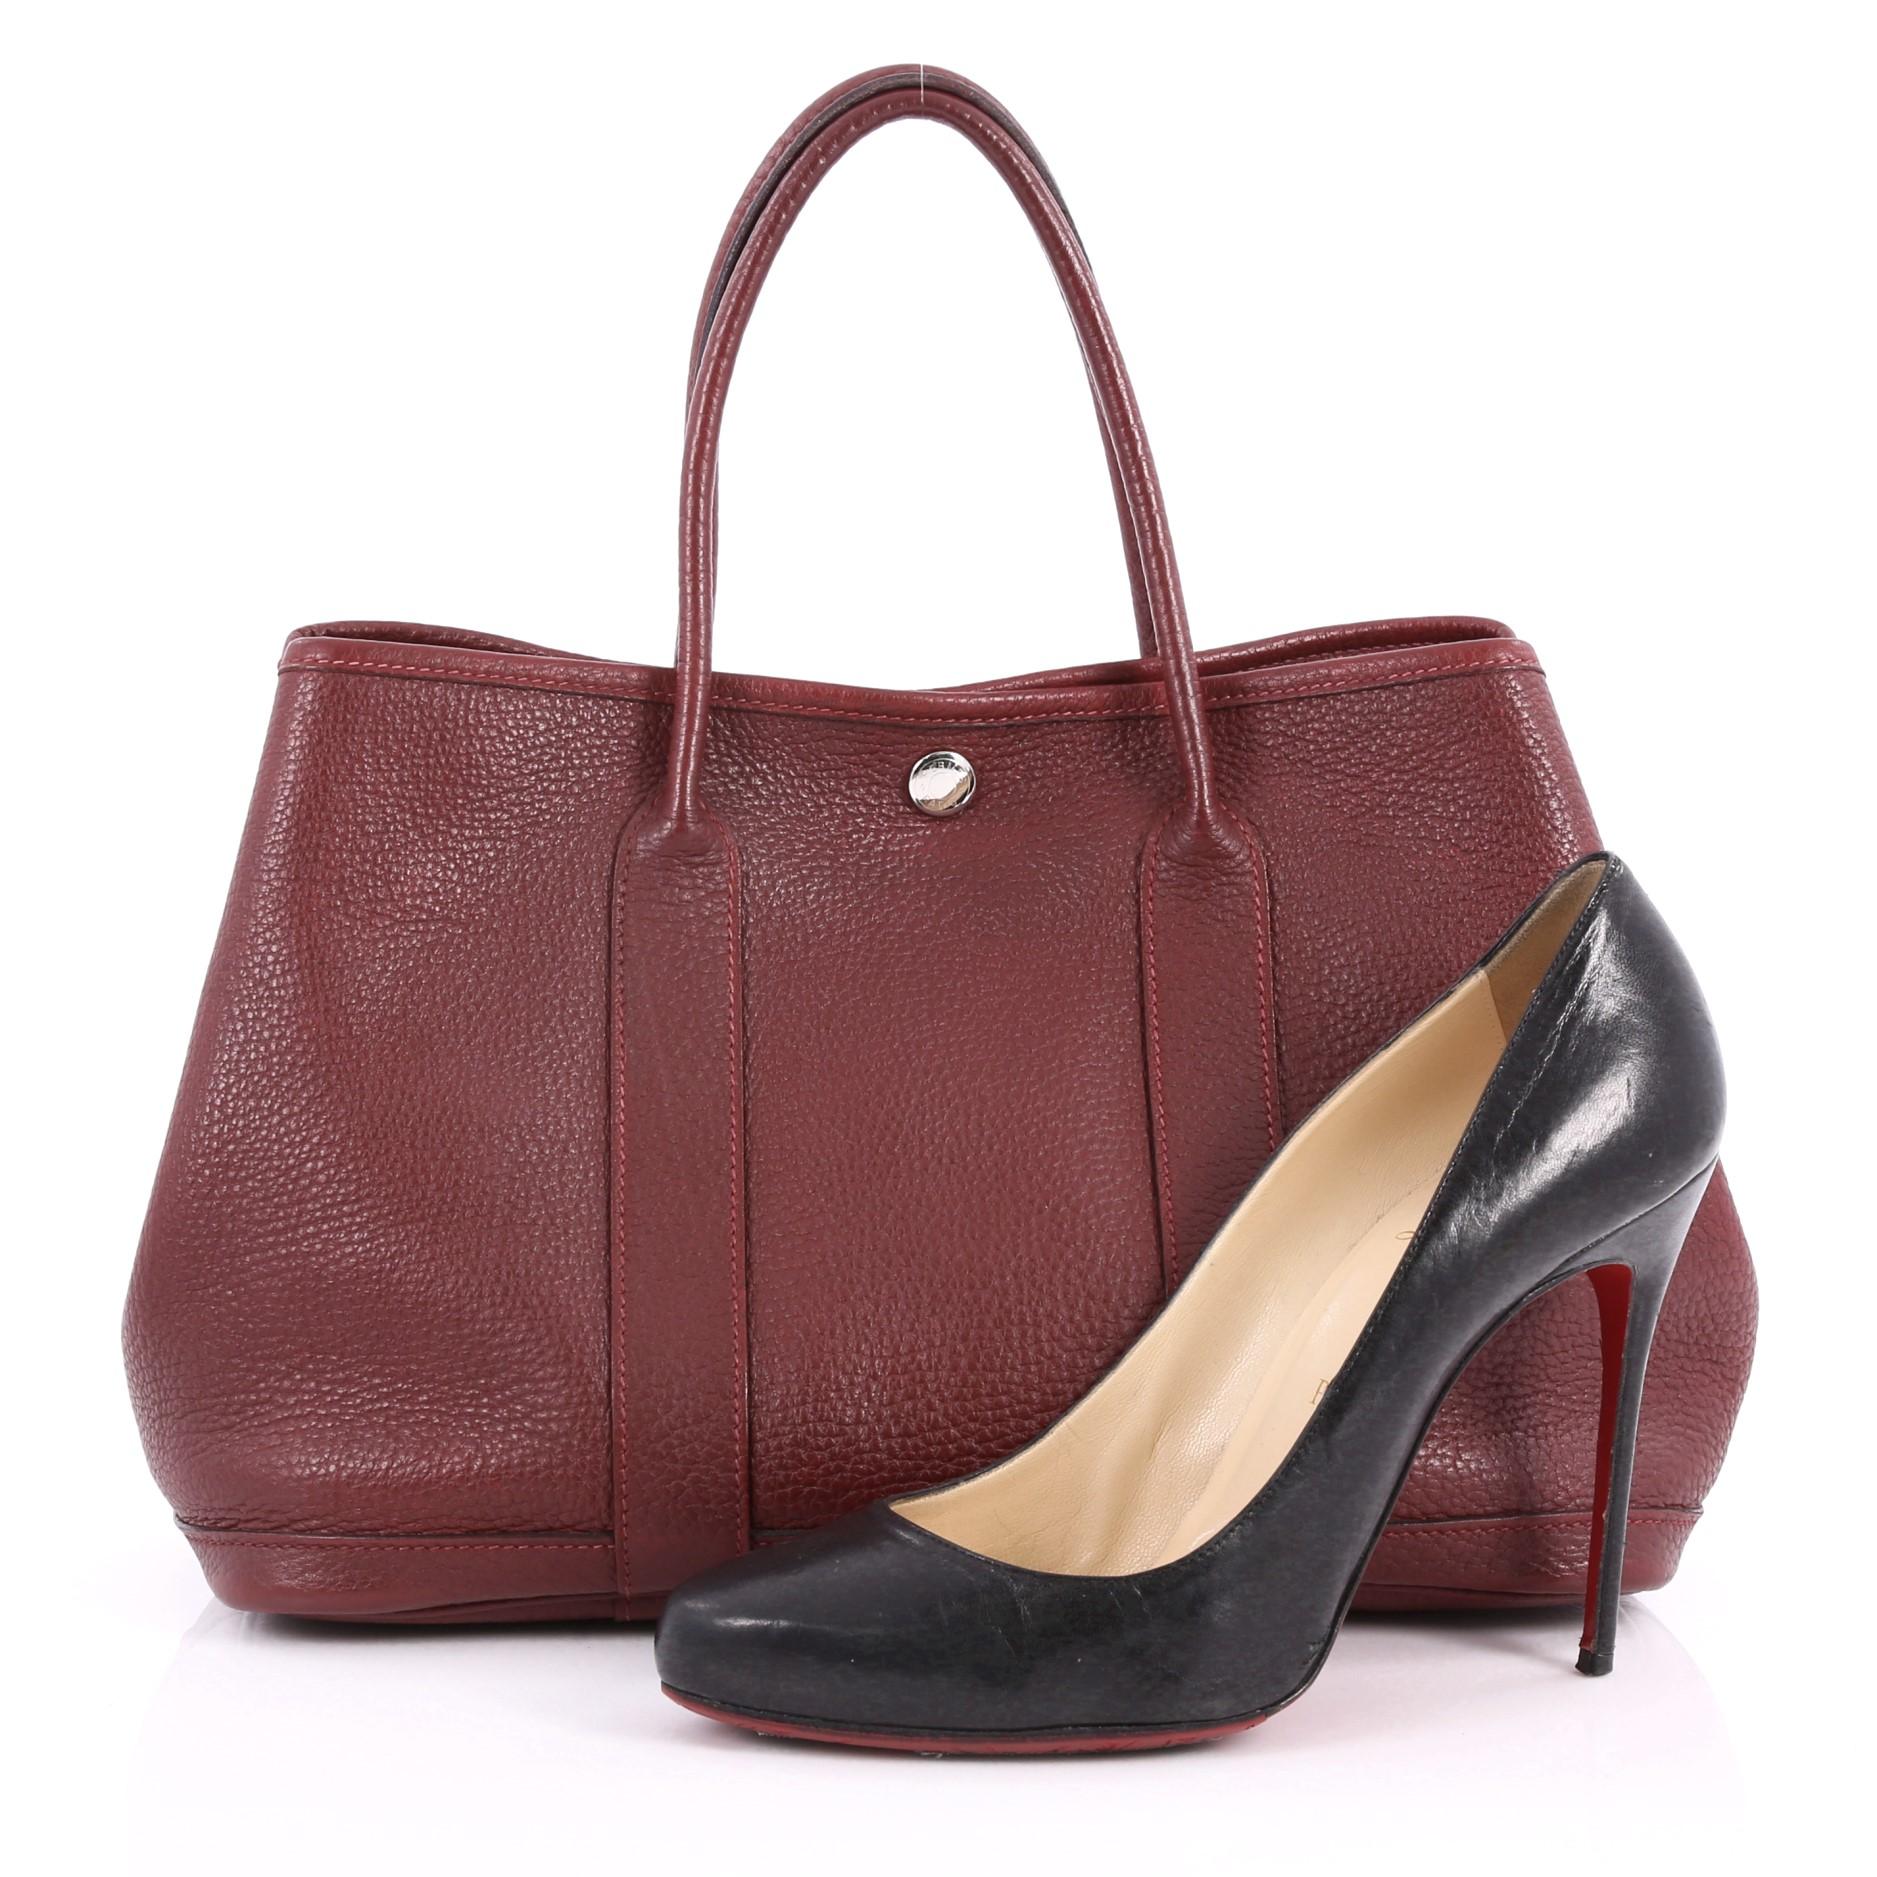 This authentic Hermes Garden Party Tote Leather 30 is an elegant and simple tote made for all seasons. Crafted from burgundy leather, this chic everyday tote features dual-rolled leather top handles, palladium button closure, side snap buttons and